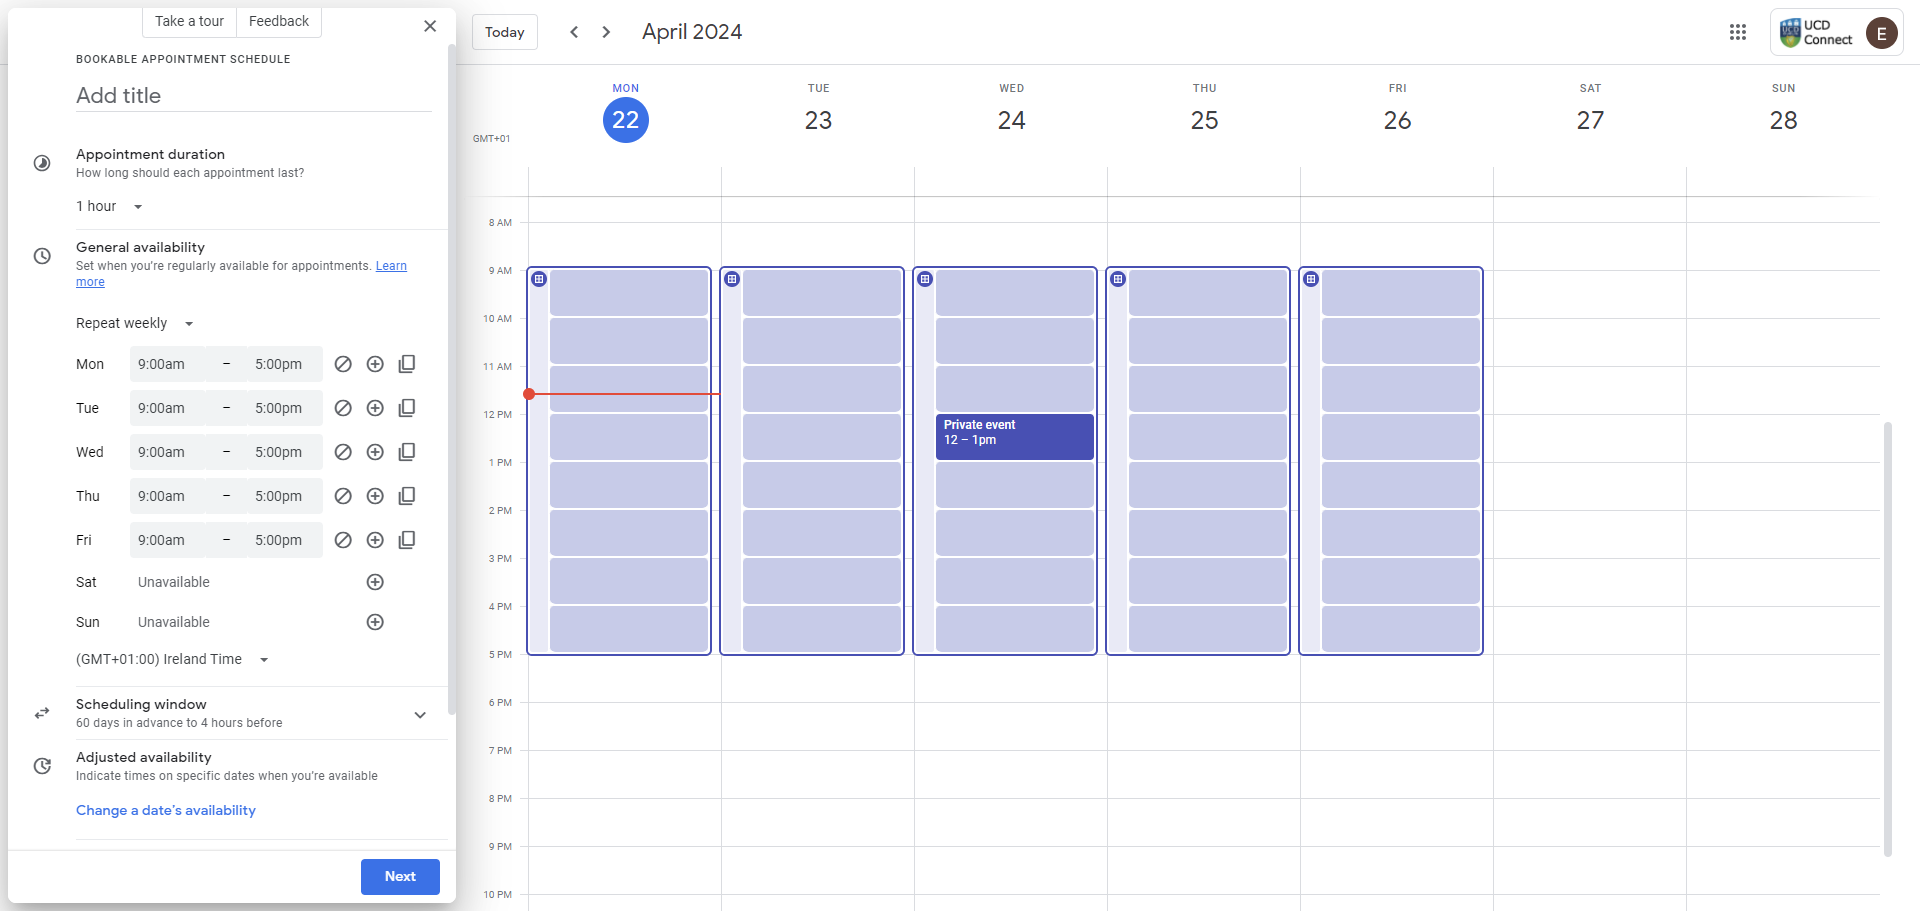 Gif showing how to create an appointment schedule in Google Calendar